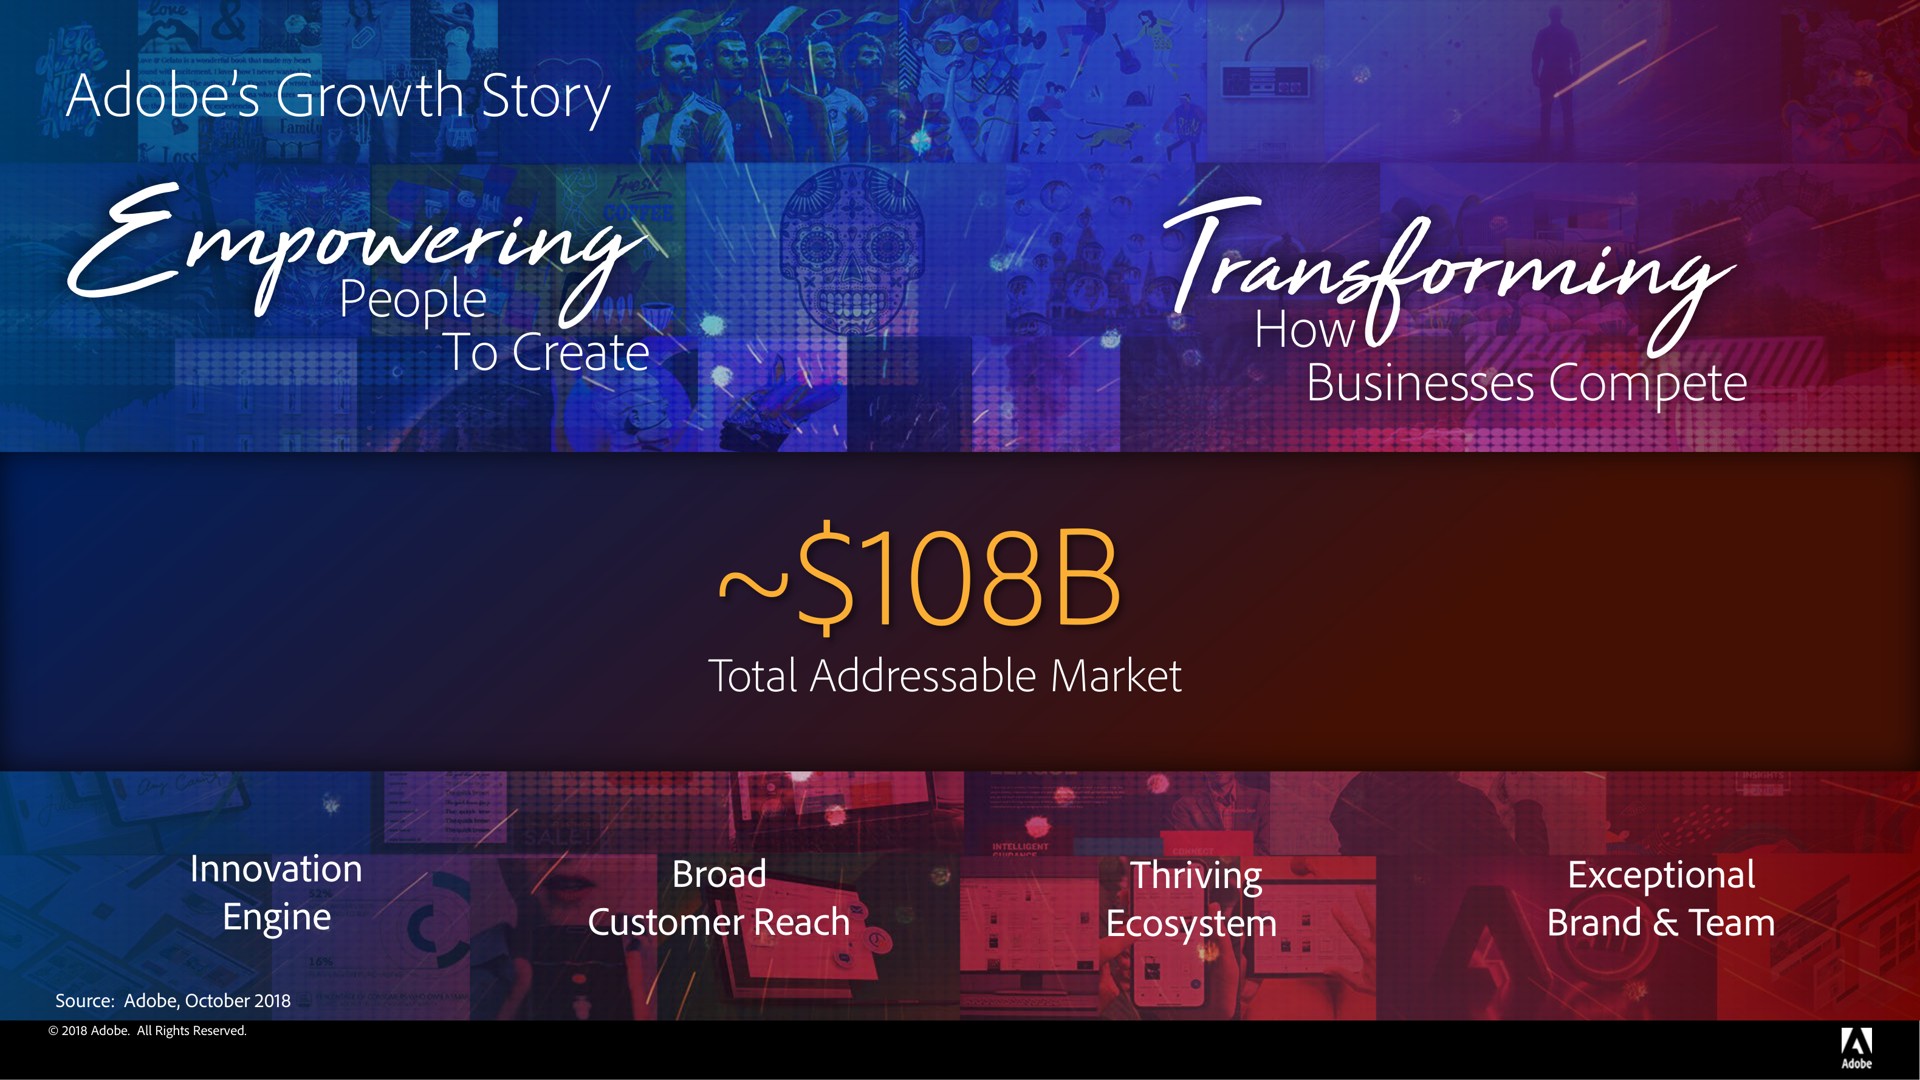 adobe growth story people to create how businesses compete rone | Adobe